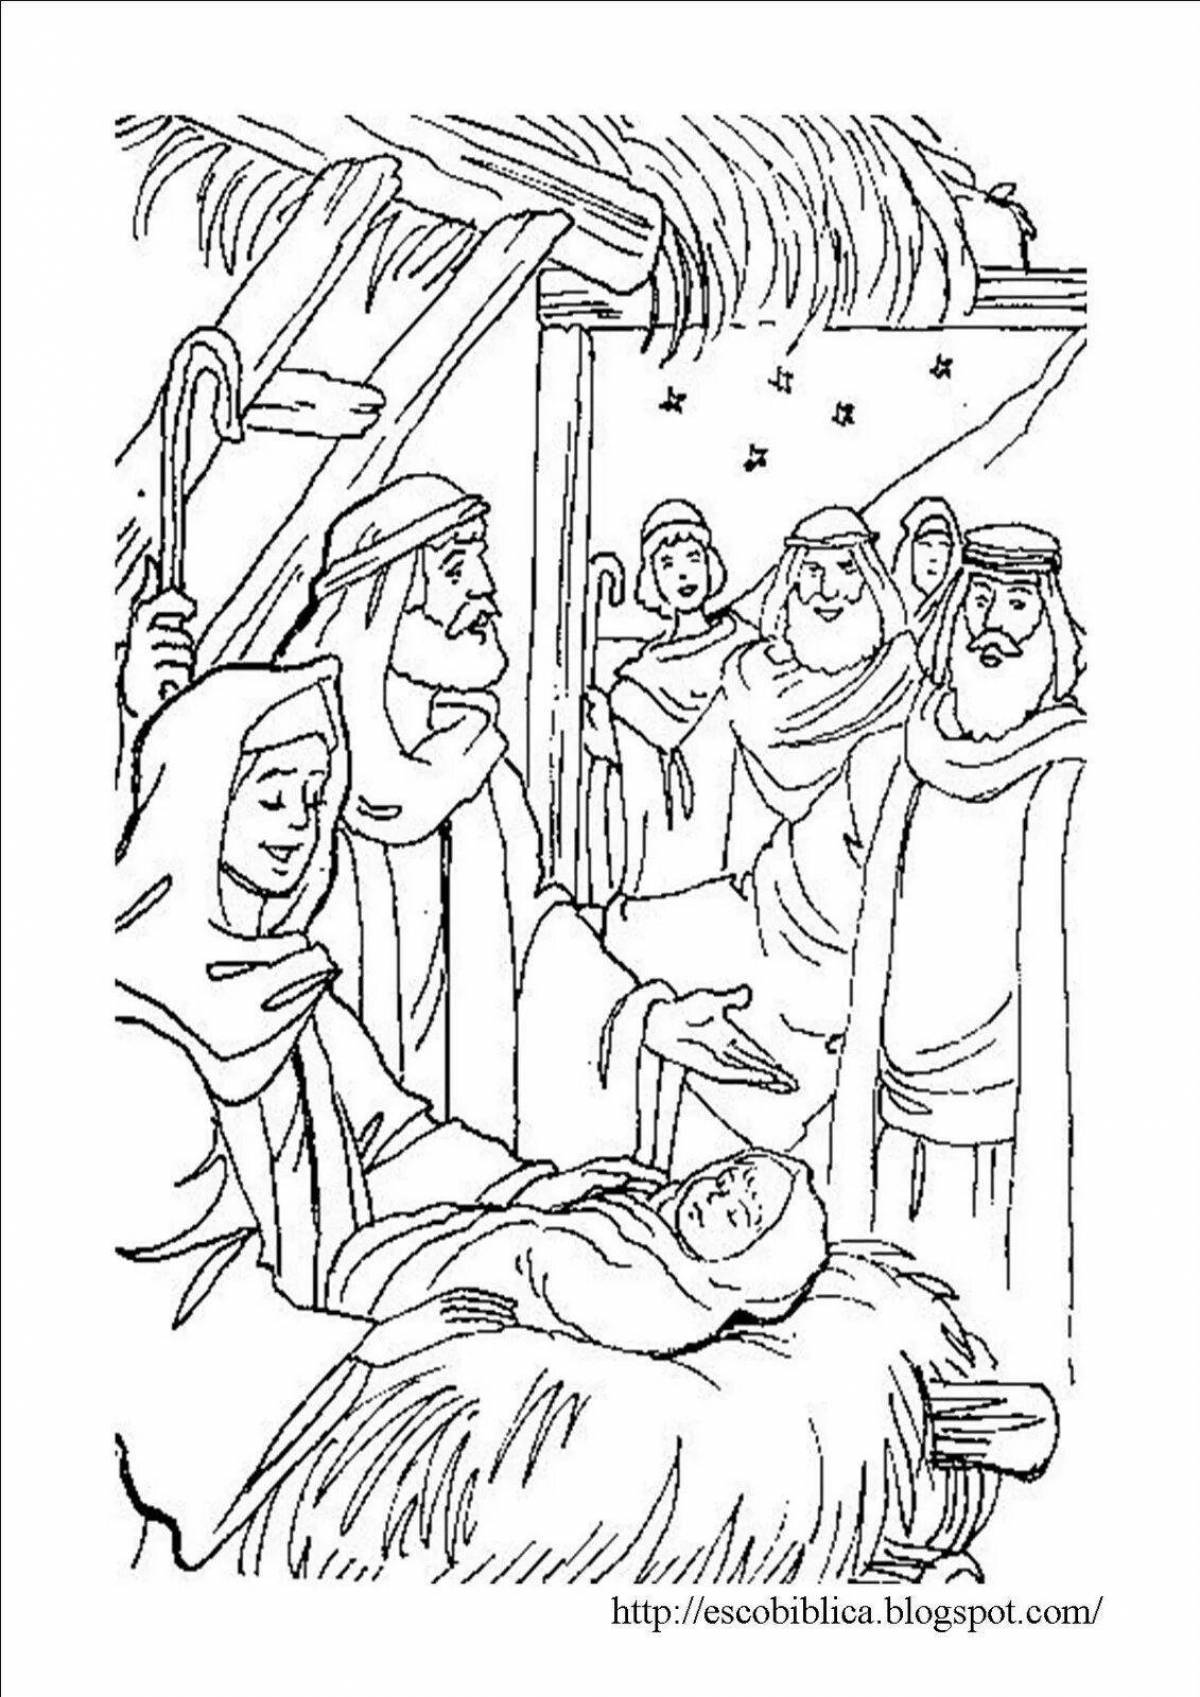 Glorious birth of christ coloring book